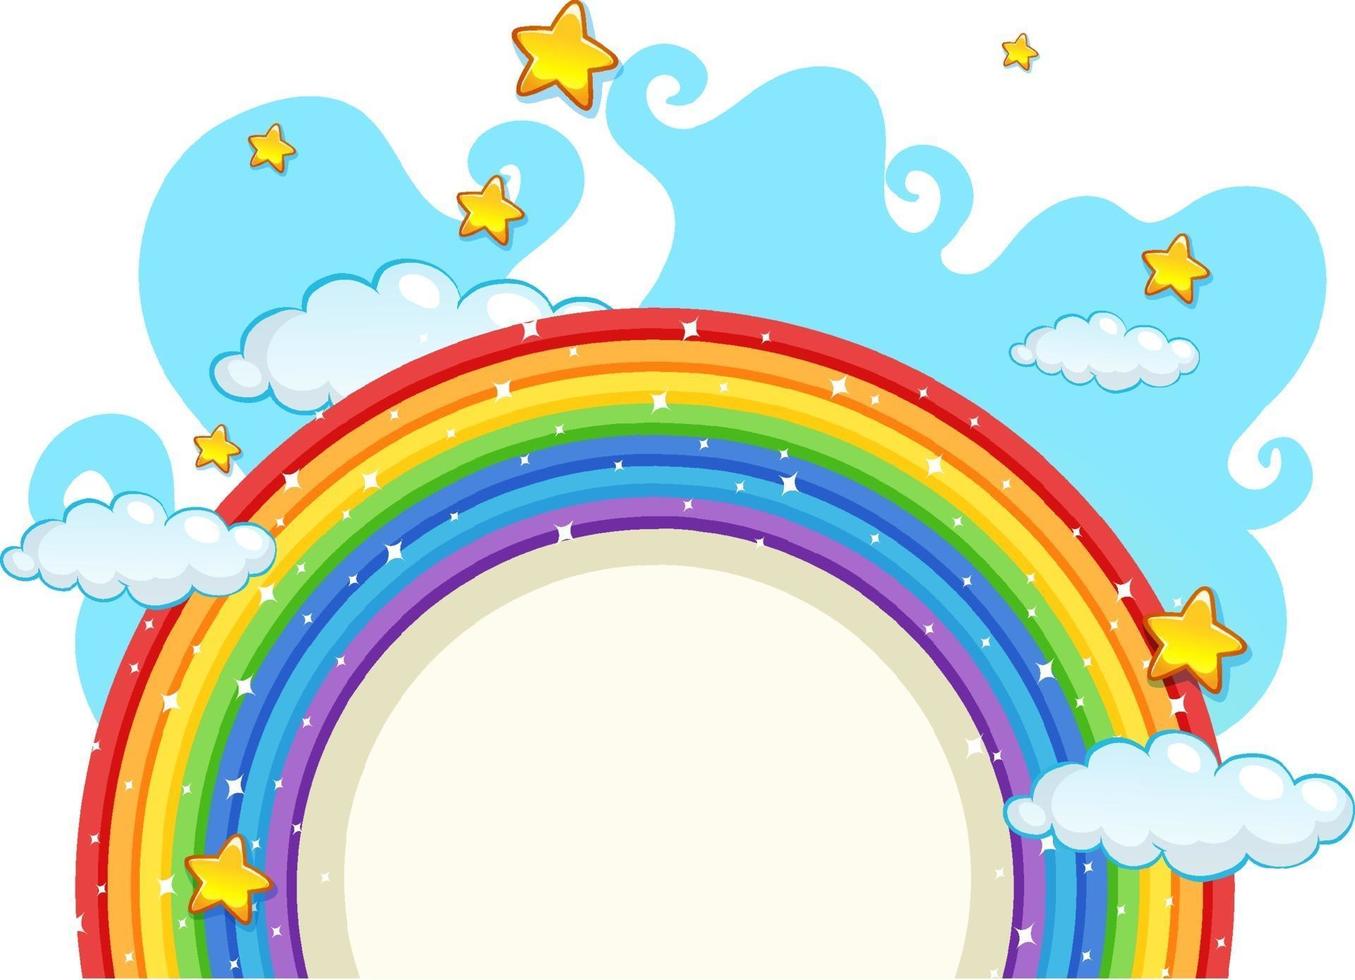 Empty banner with rainbow frame on white background vector